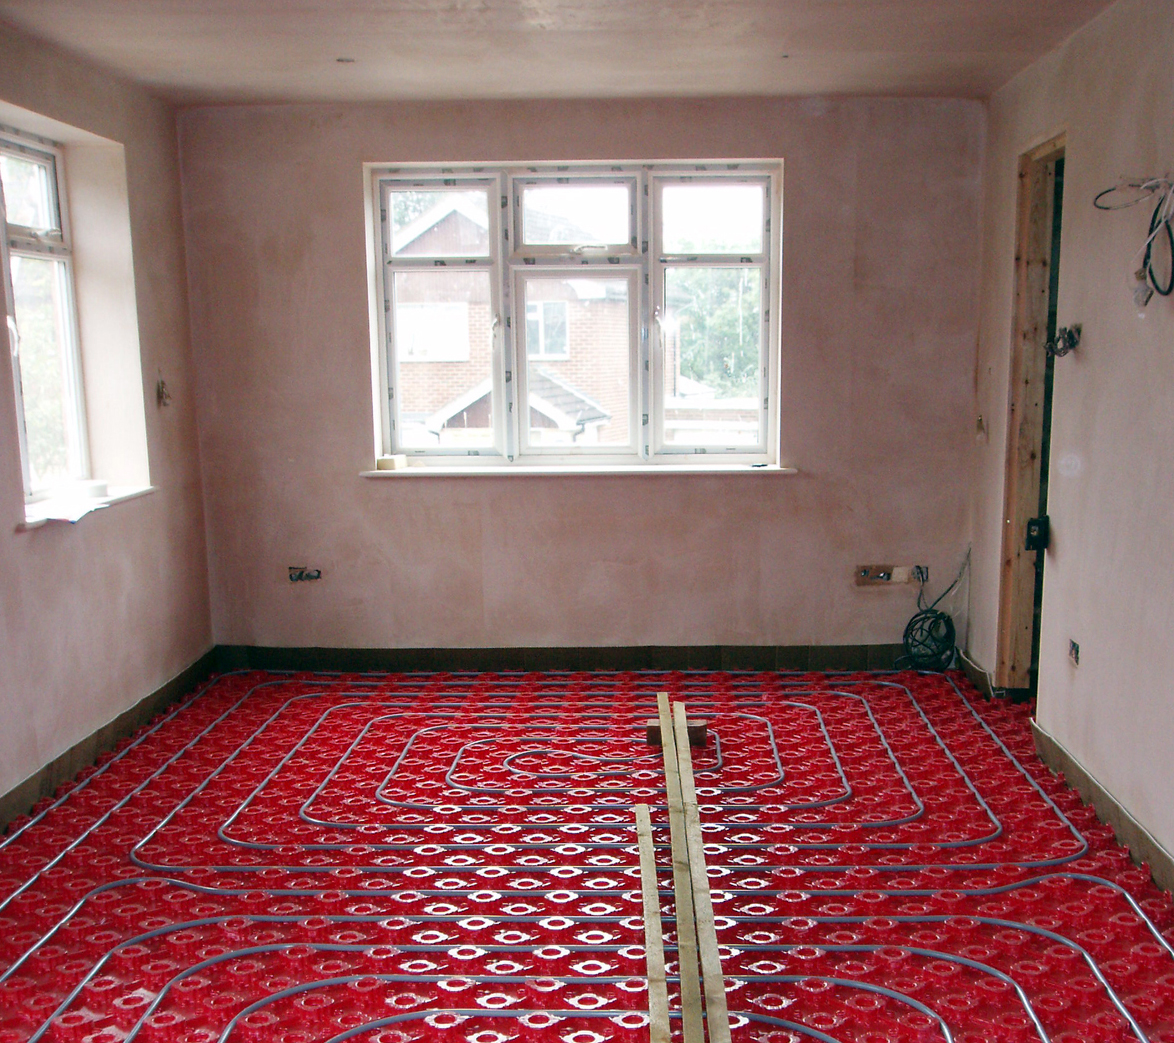 domestic underfloor heating construction of hot water pipes